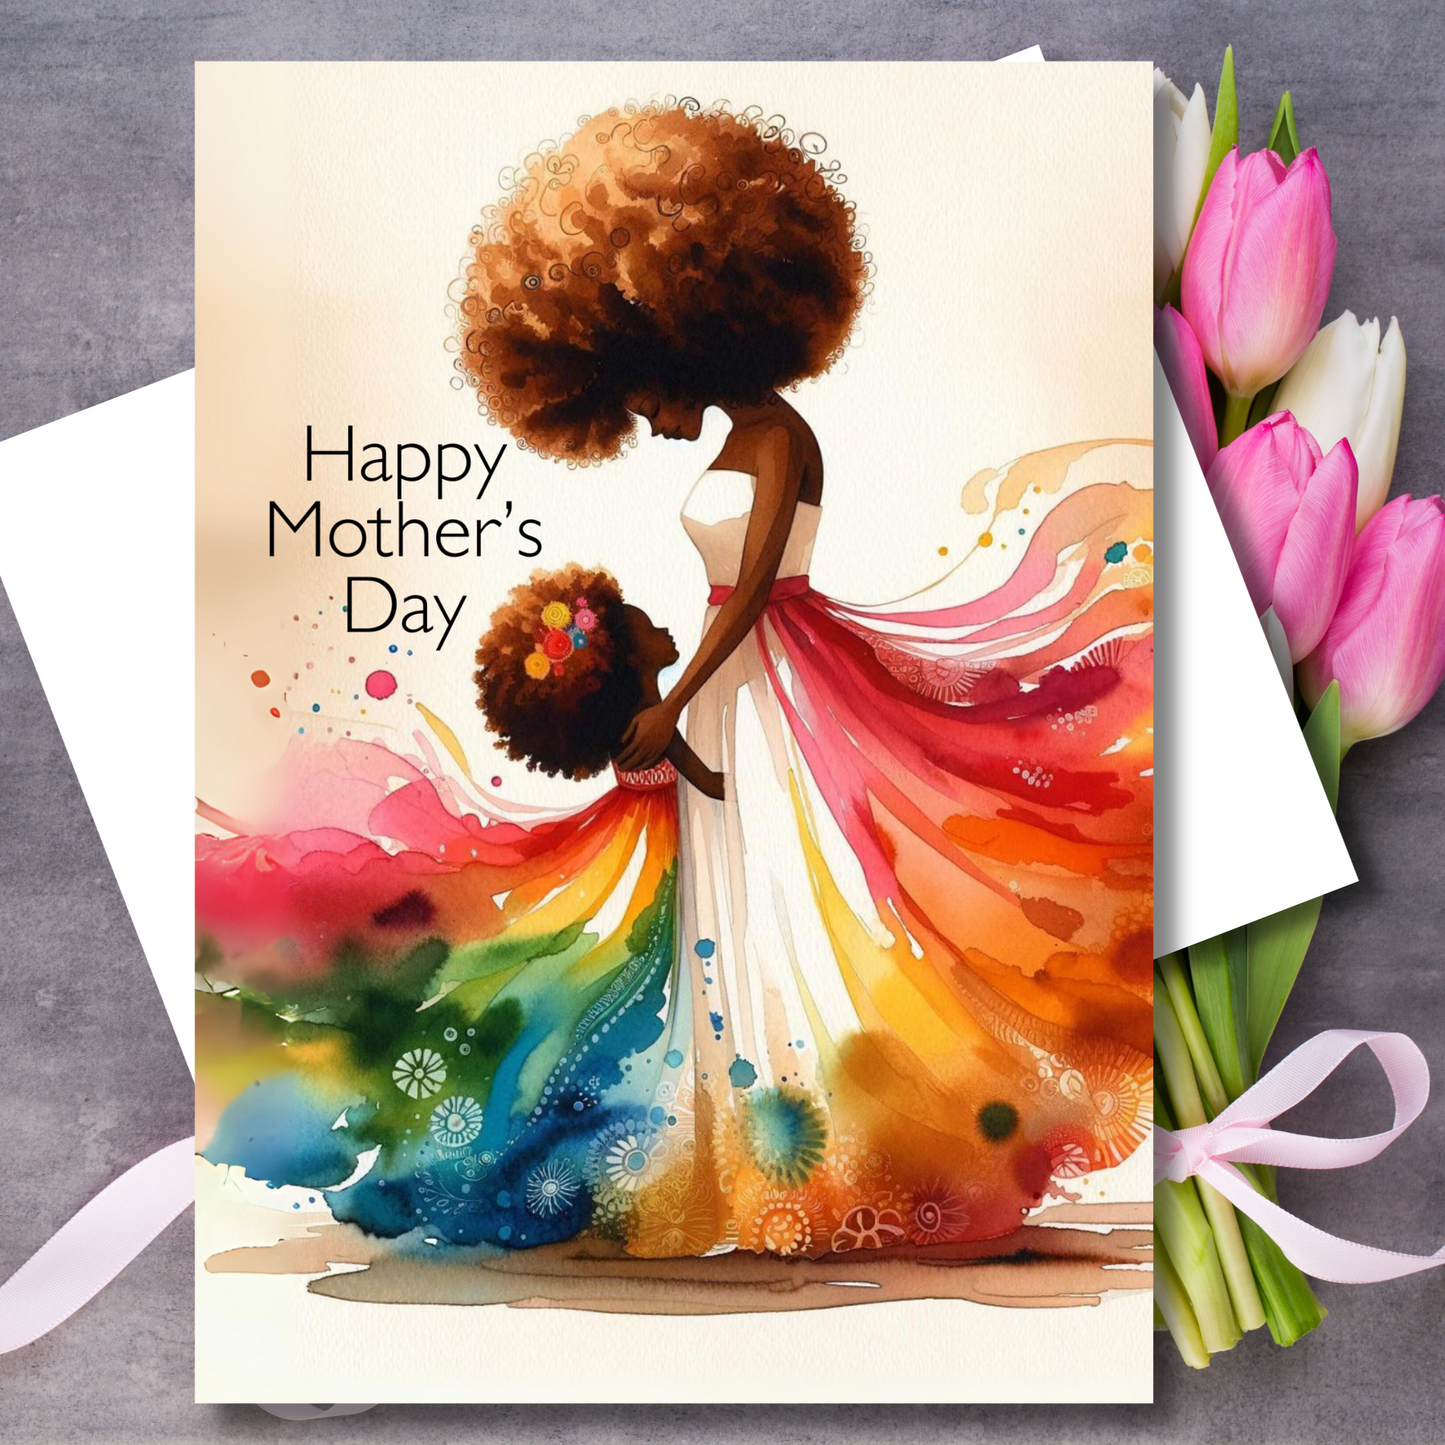 Happy Mother's Day Card | African American Greeting Card | Optional Interior Message